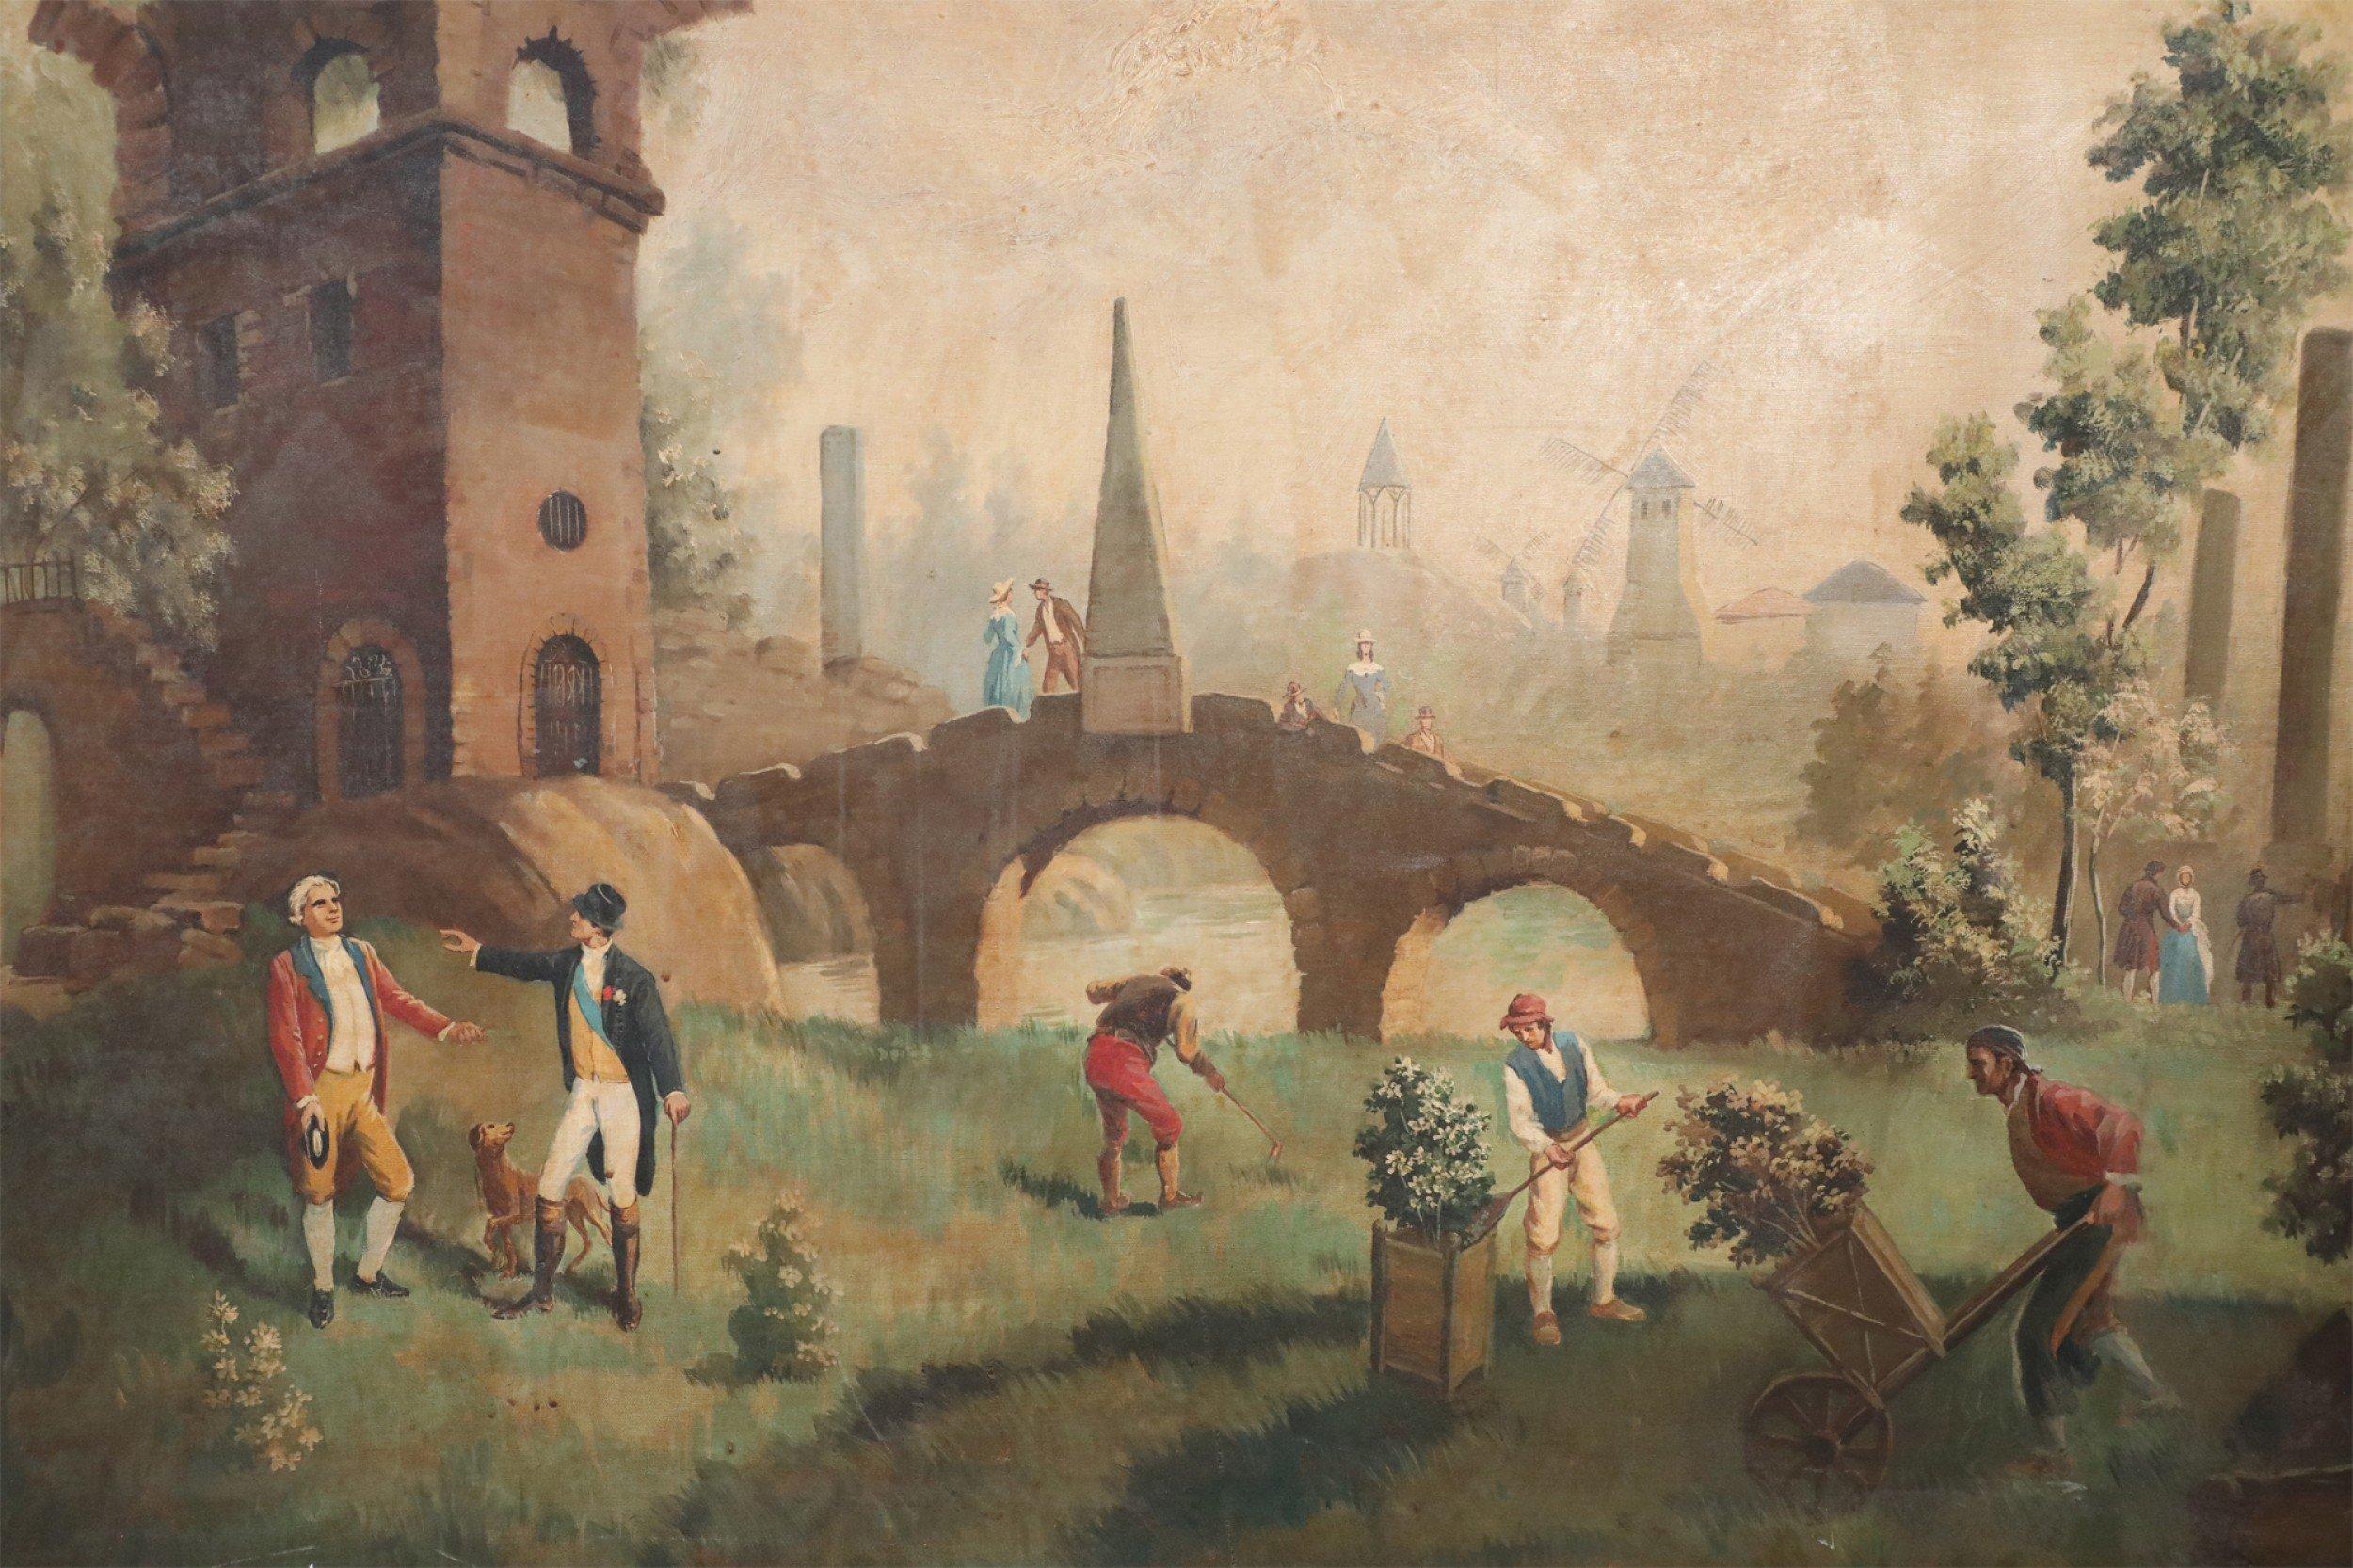 Vintage (20th Century) genre painting capturing figures working in a garden, where two noblemen are also conversing, at the foot of ruins and a stone bridge, while a windmill and buildings are seen in the distance. Painted in muted tones on